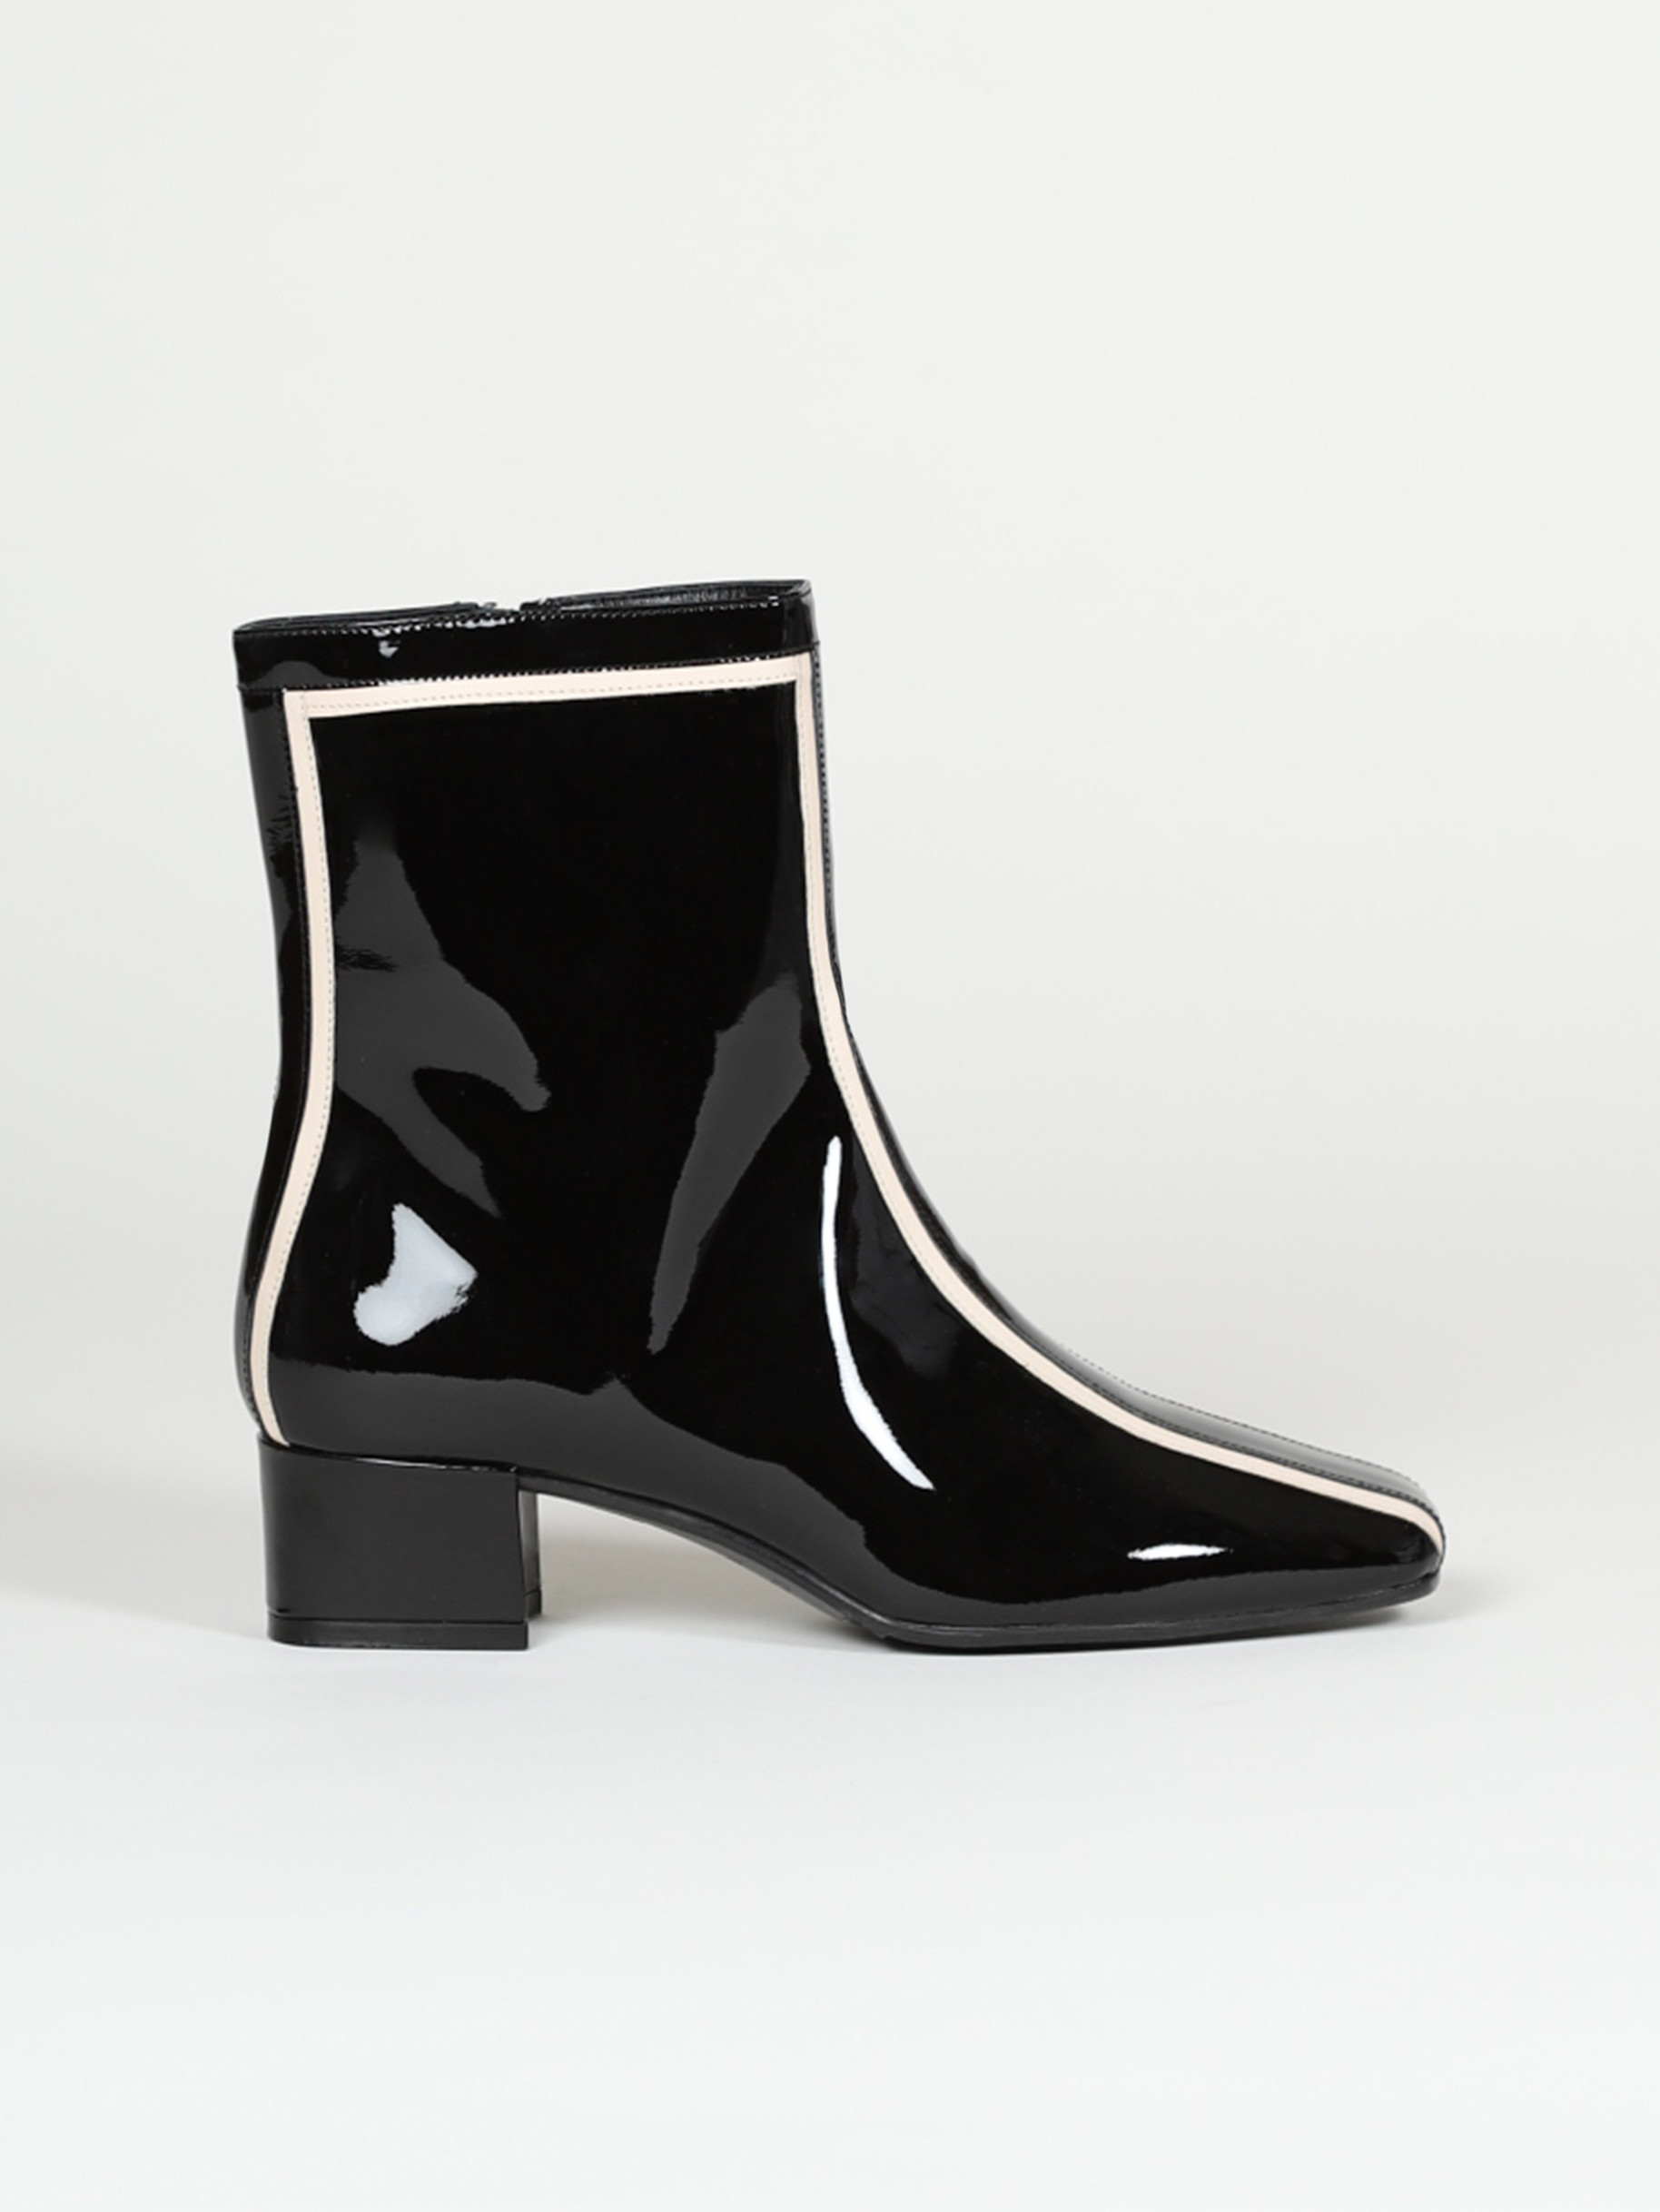 SOHO black and white patent leather ankle boots | Carel Paris Shoes